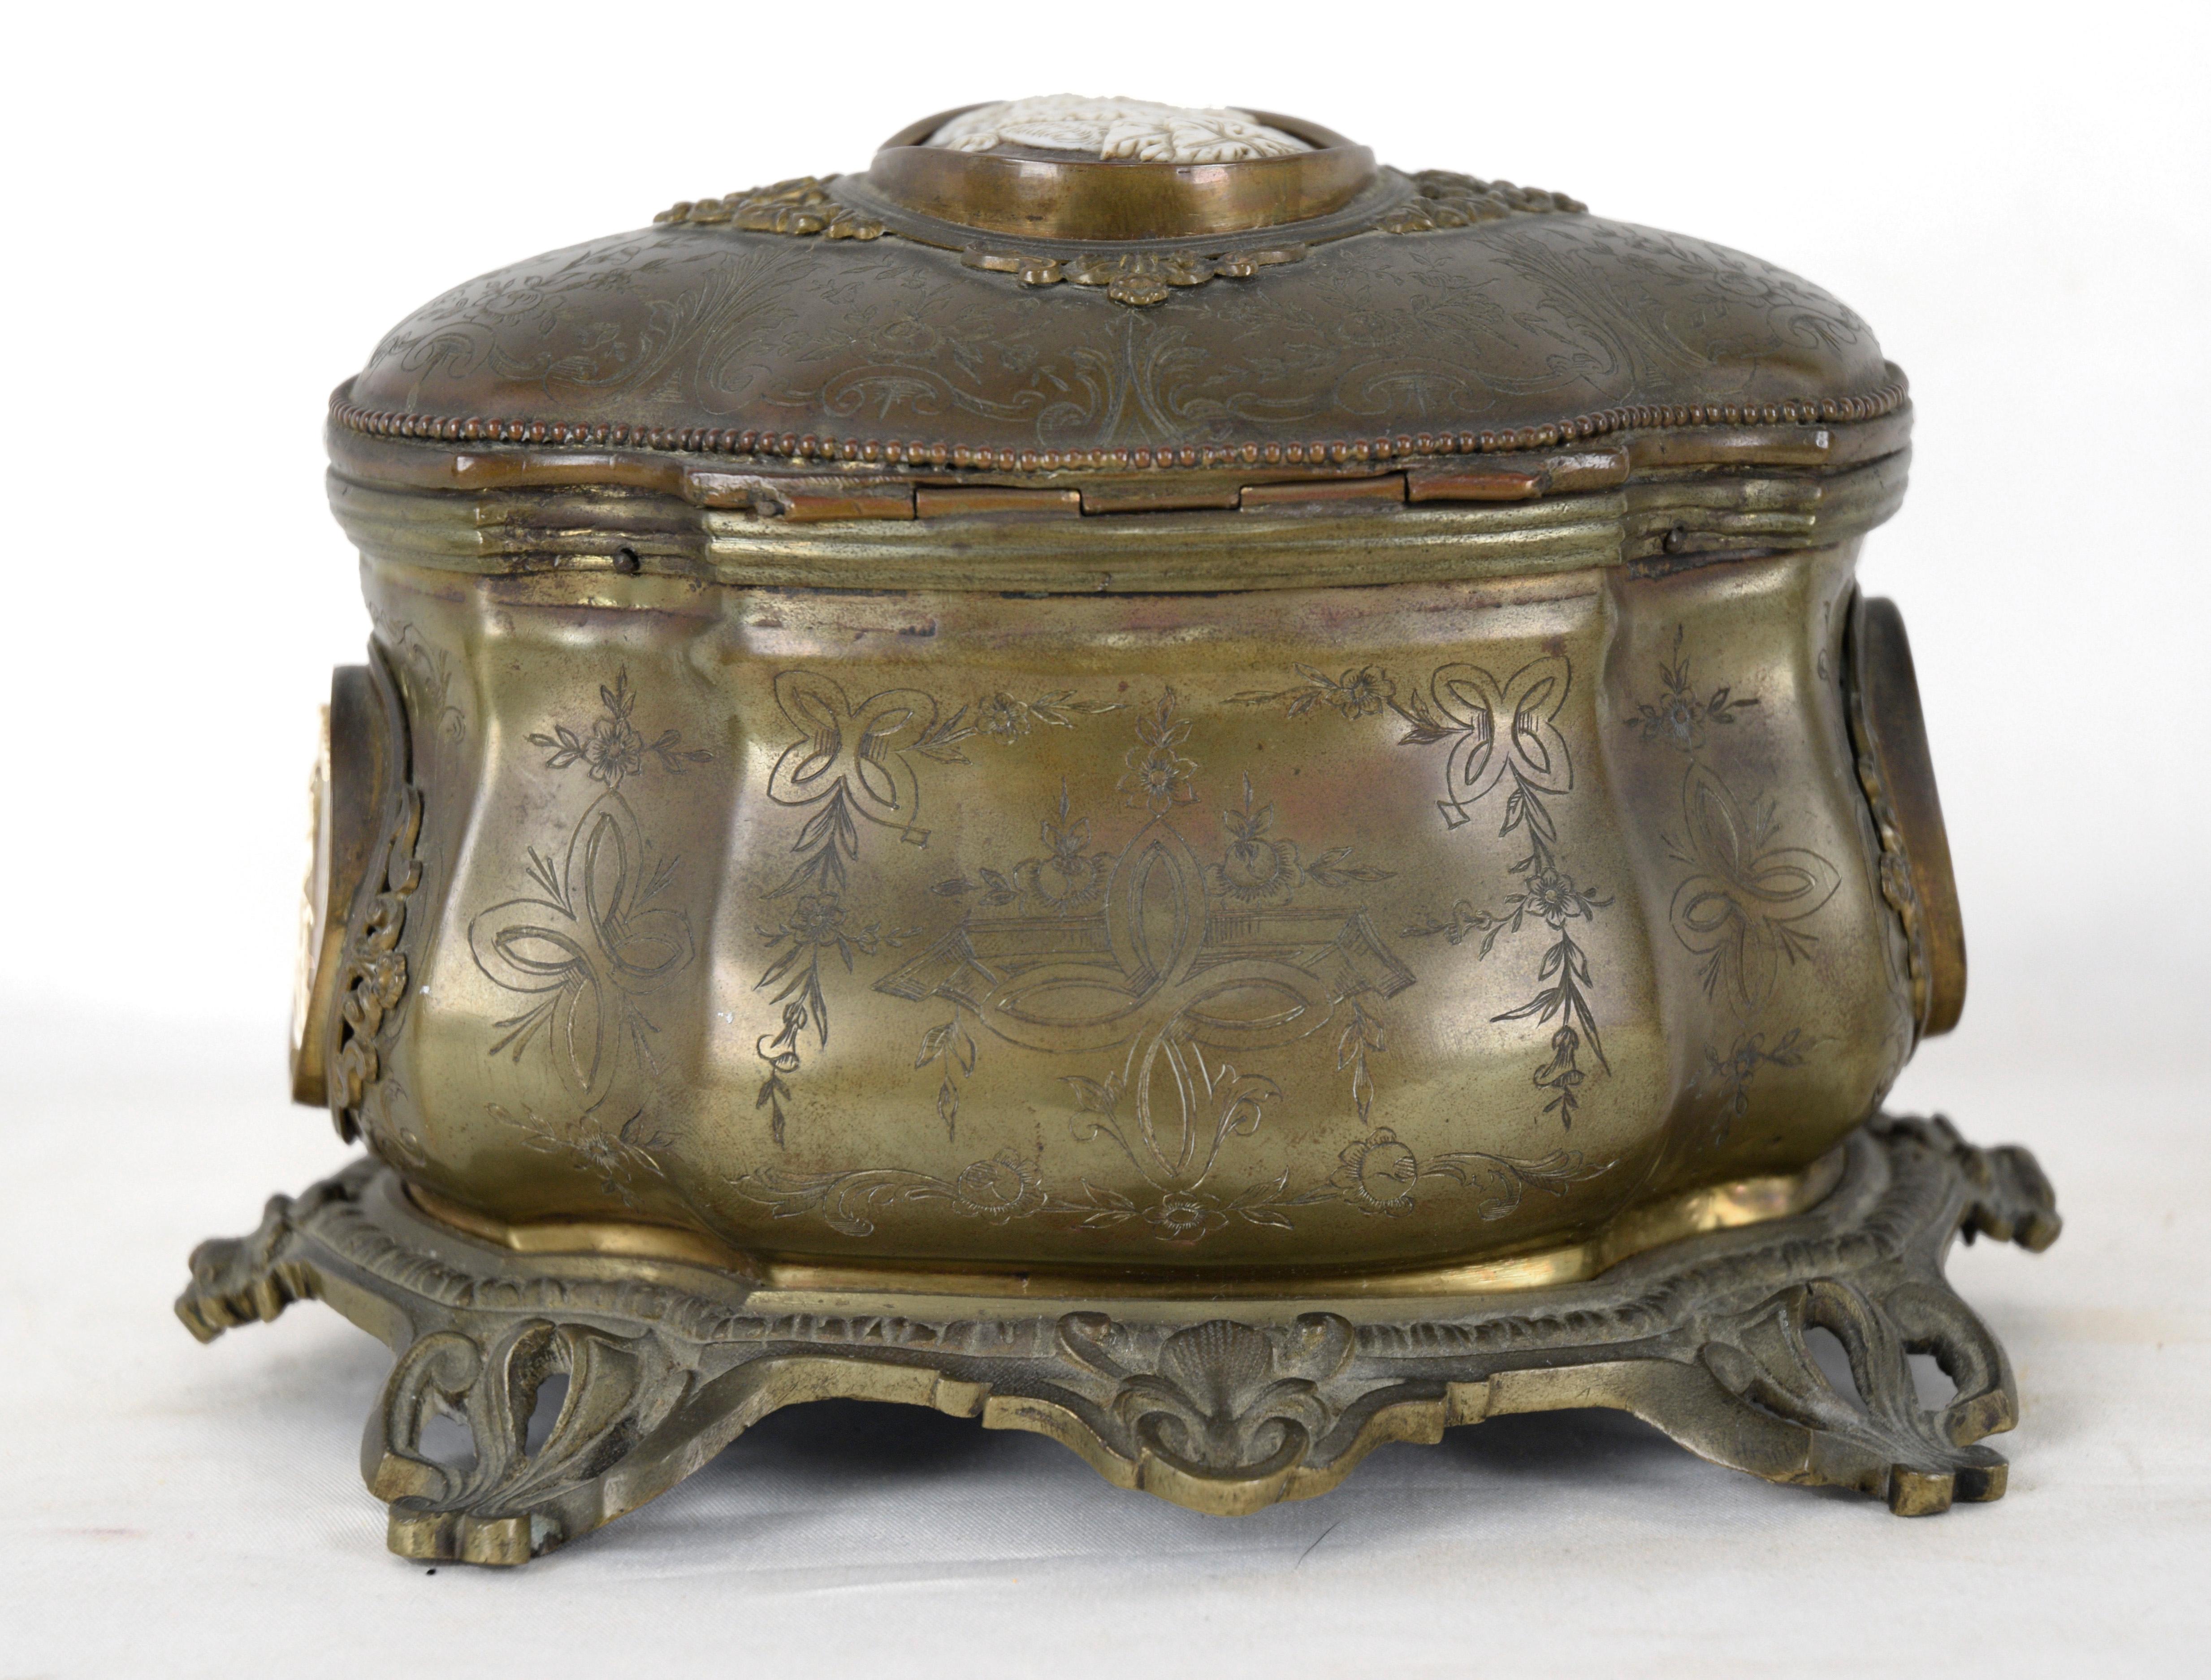 Carved Bronze Jewelry-Casket with Ornate Etchings and Cameos Inlaid by Tahan of Paris For Sale